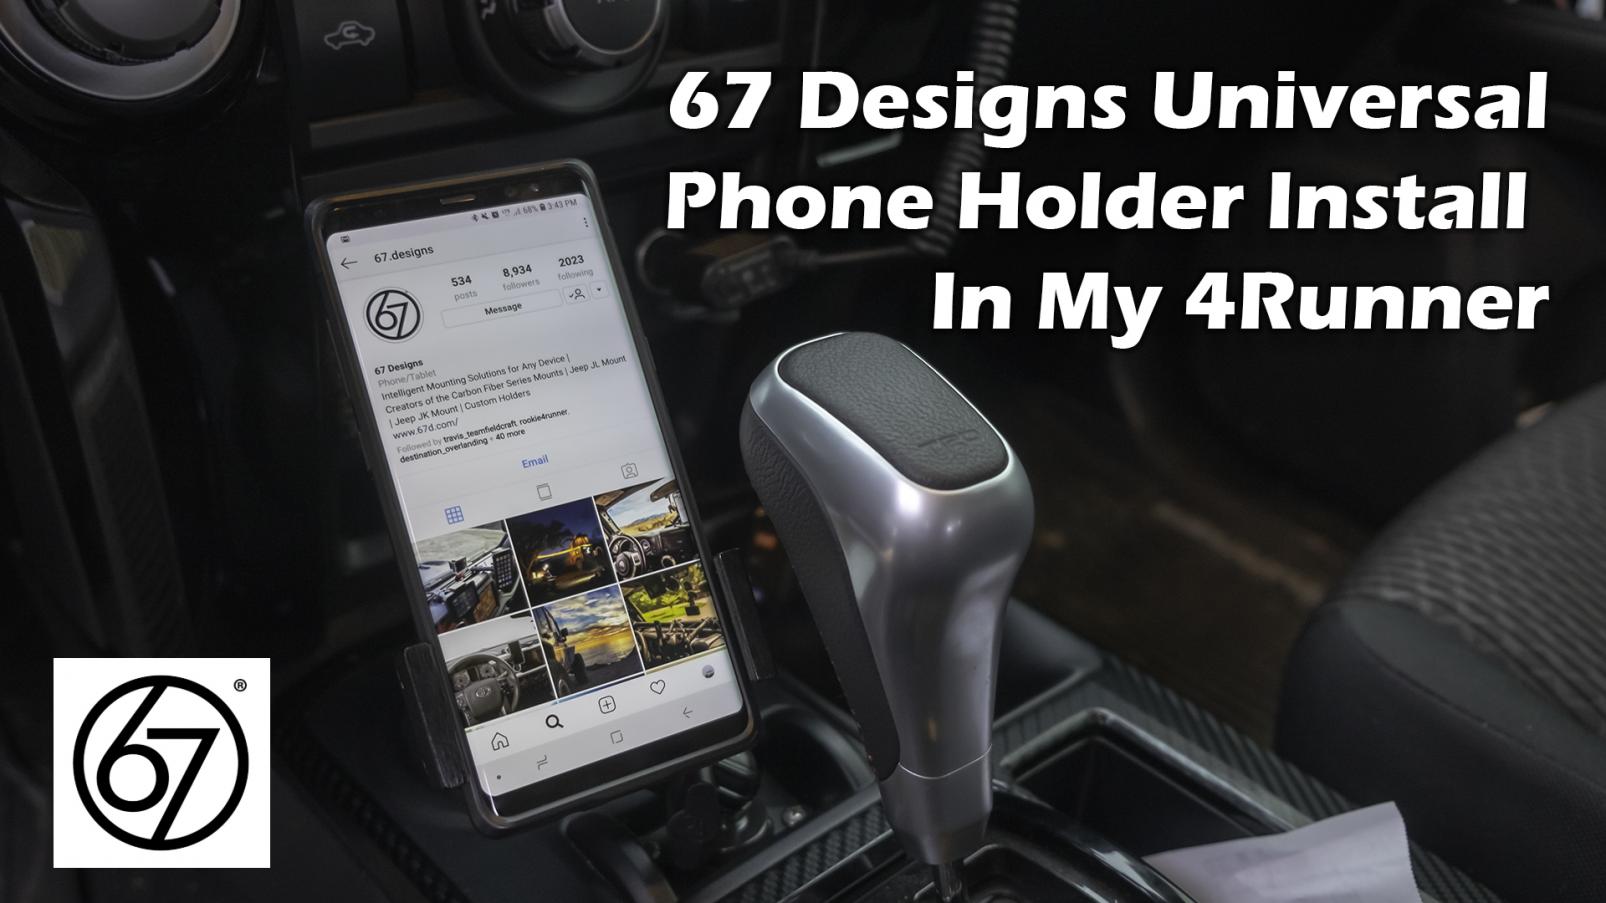 Diffinitive cell phone mount solution thread?-67d-thumbnail-jpg